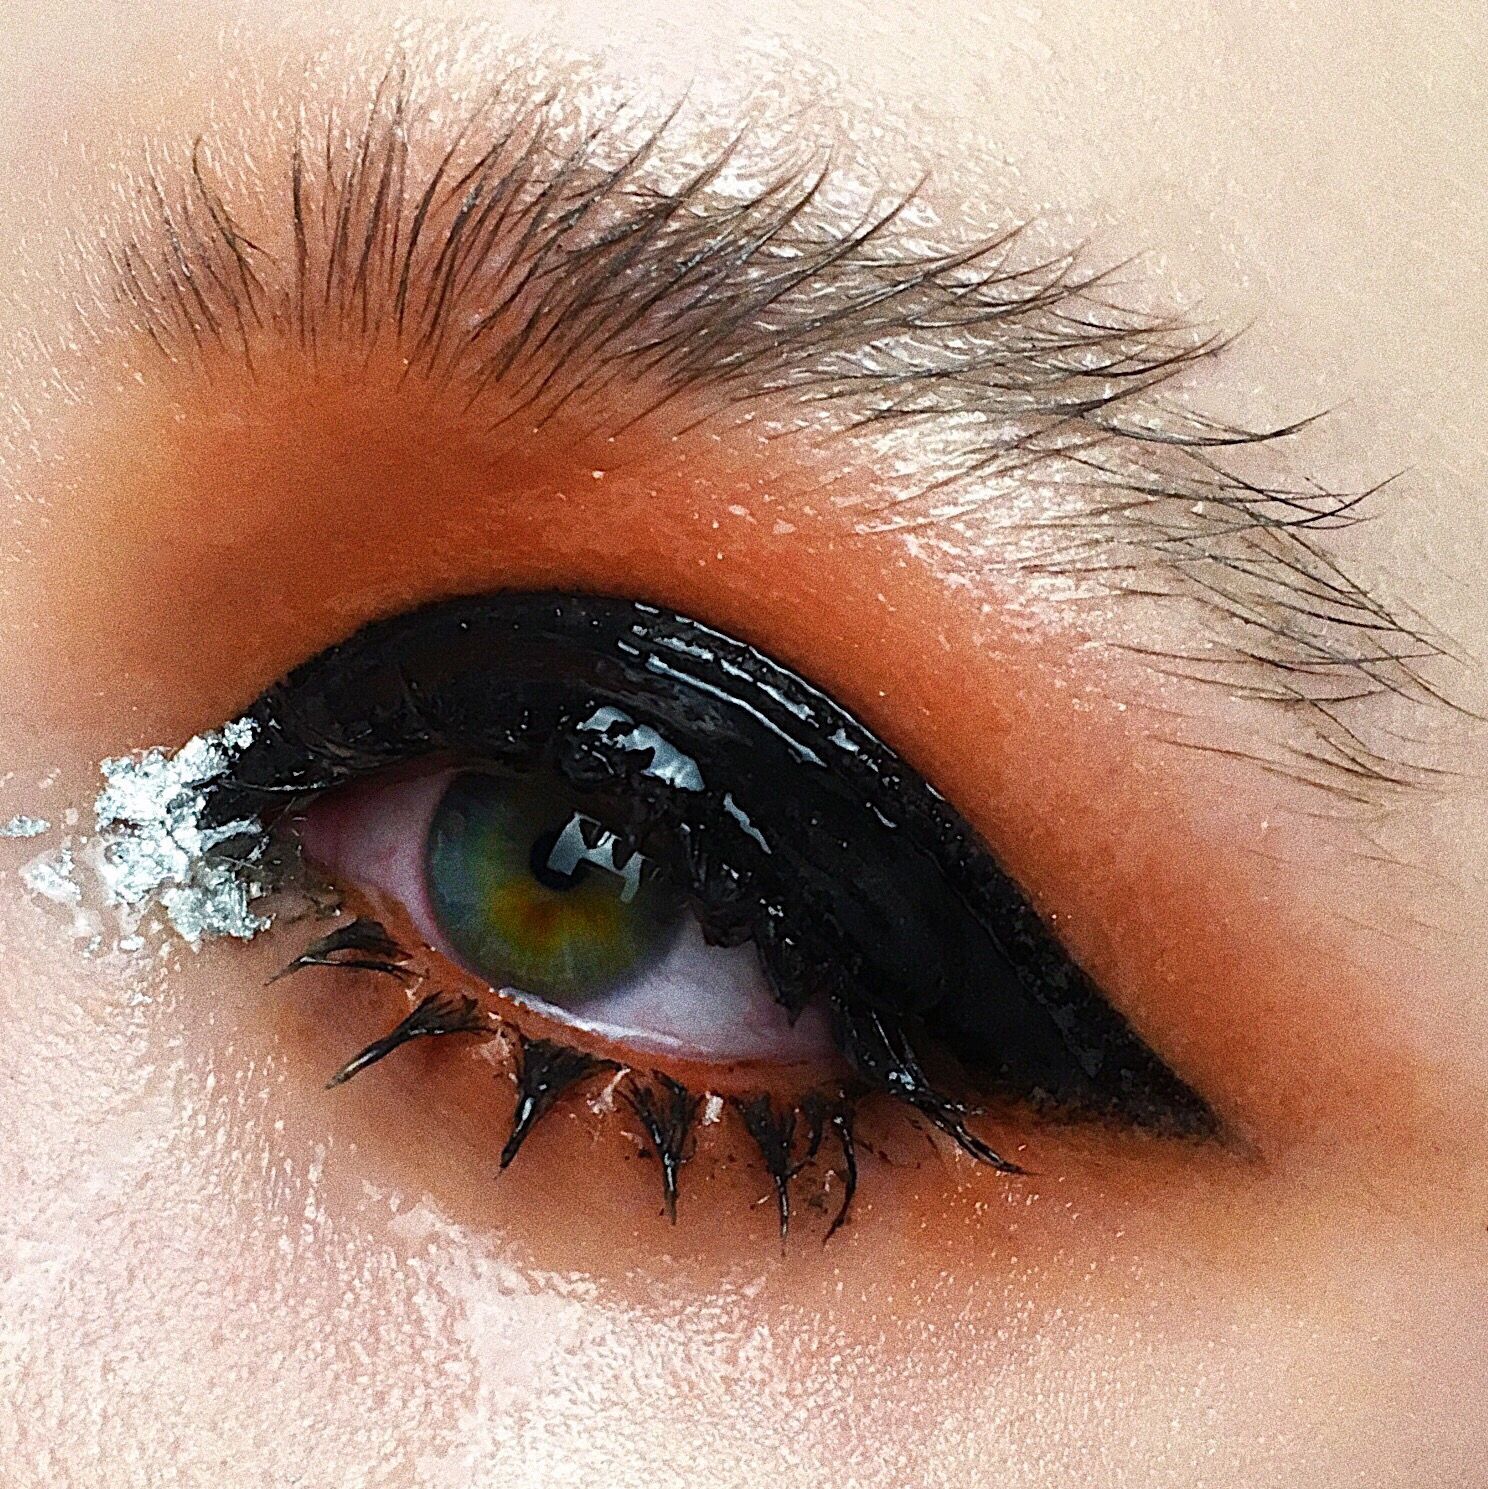 a close-up og a green eye with black and orange glossy eye lid makeup look and fuzzy eyebrows